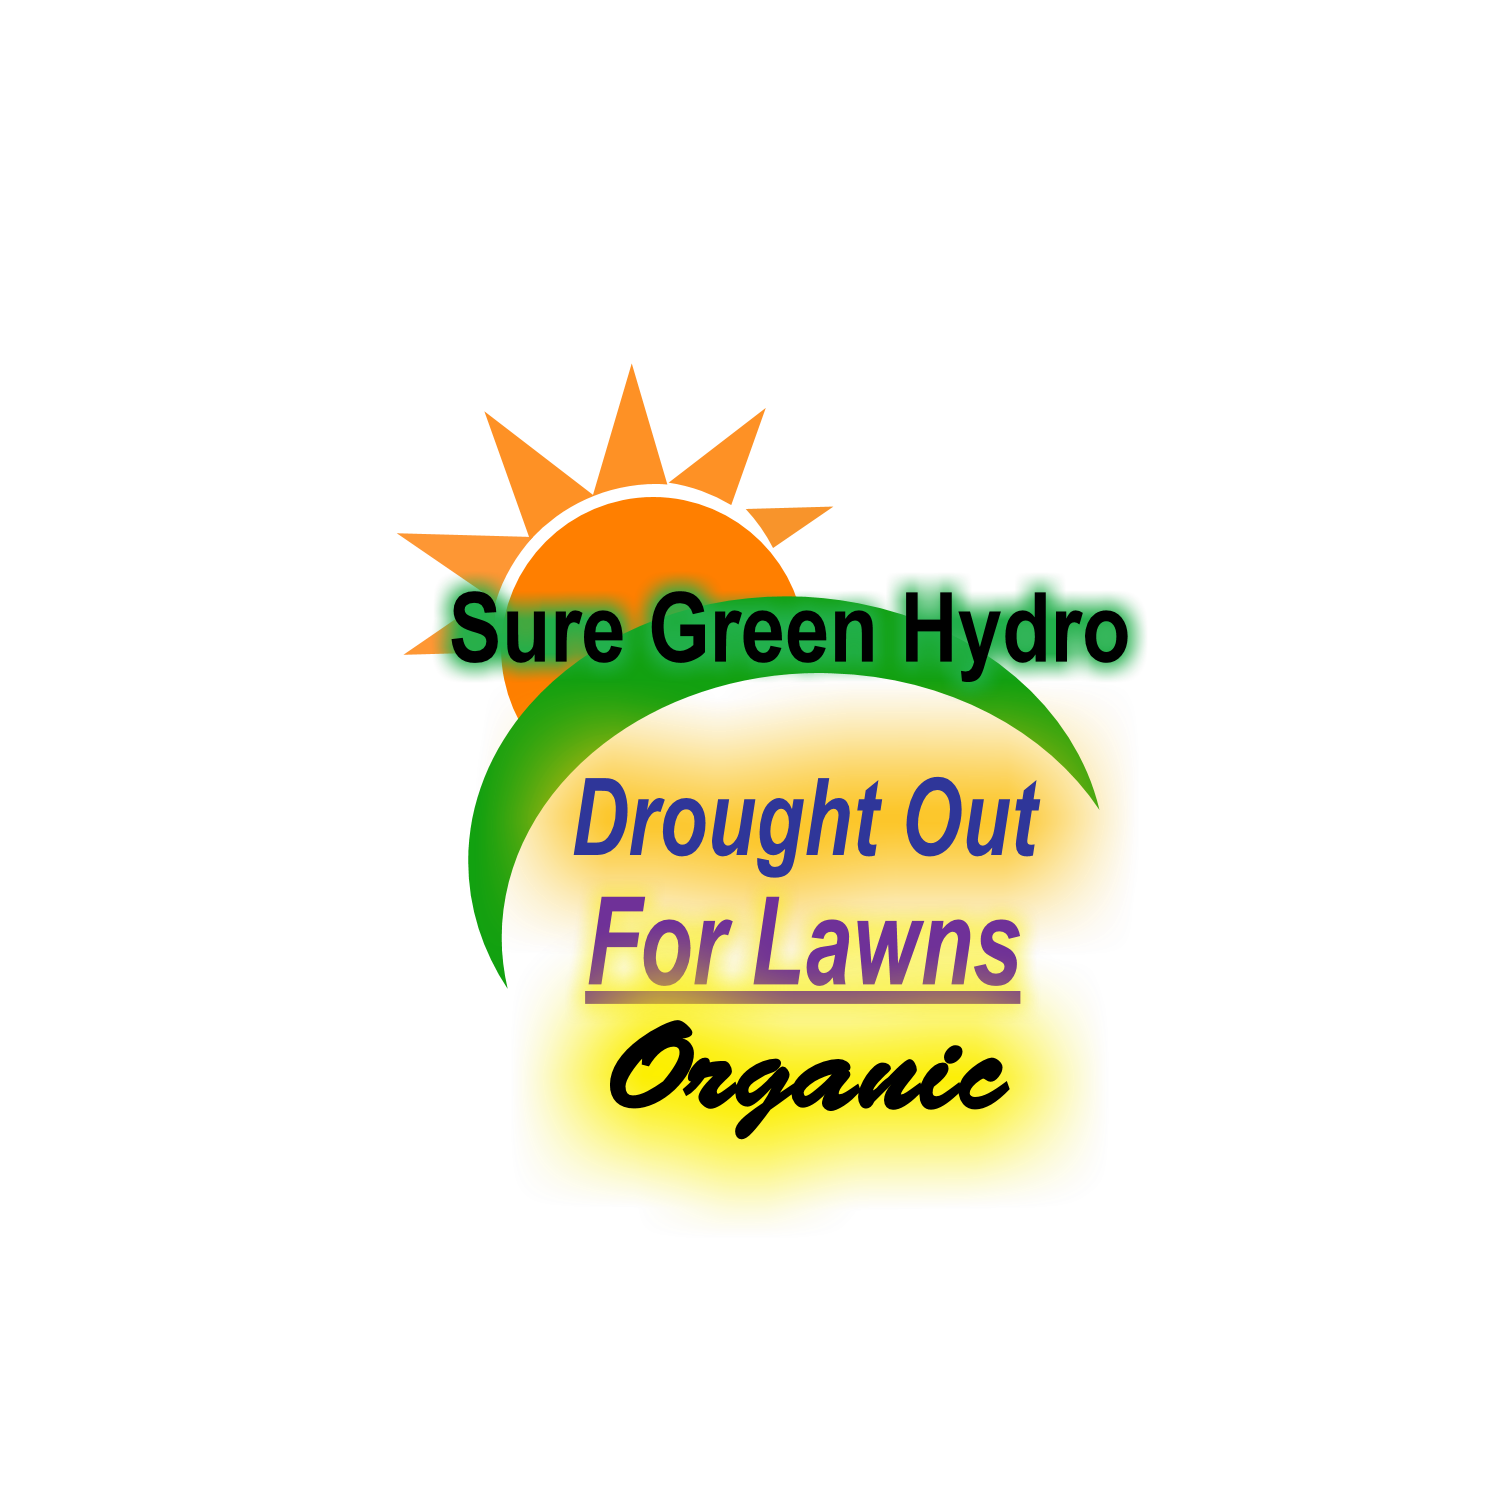 Drought Out/ Heat Stress Relief For Lawns